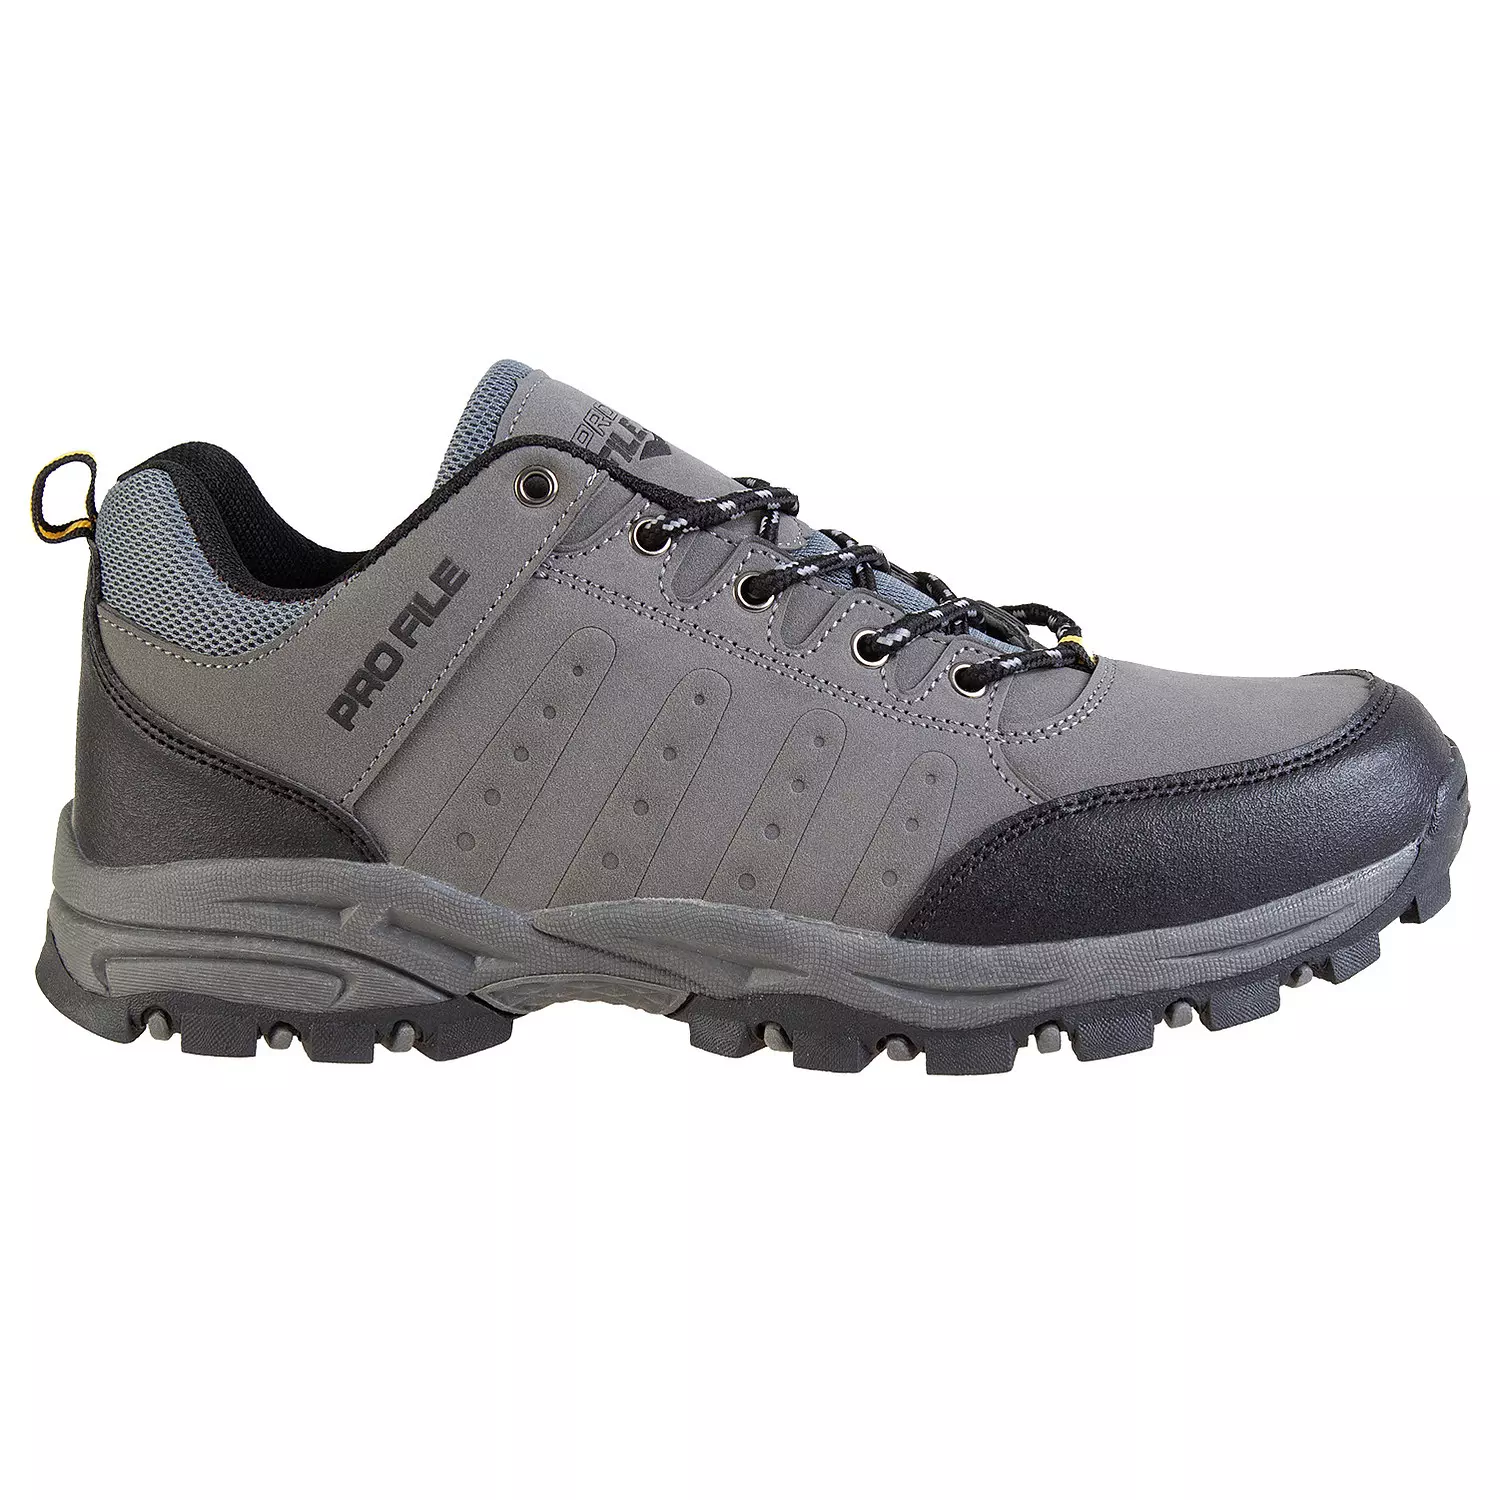 Men's 2-toned, lace-up hiking shoes, grey, size 8